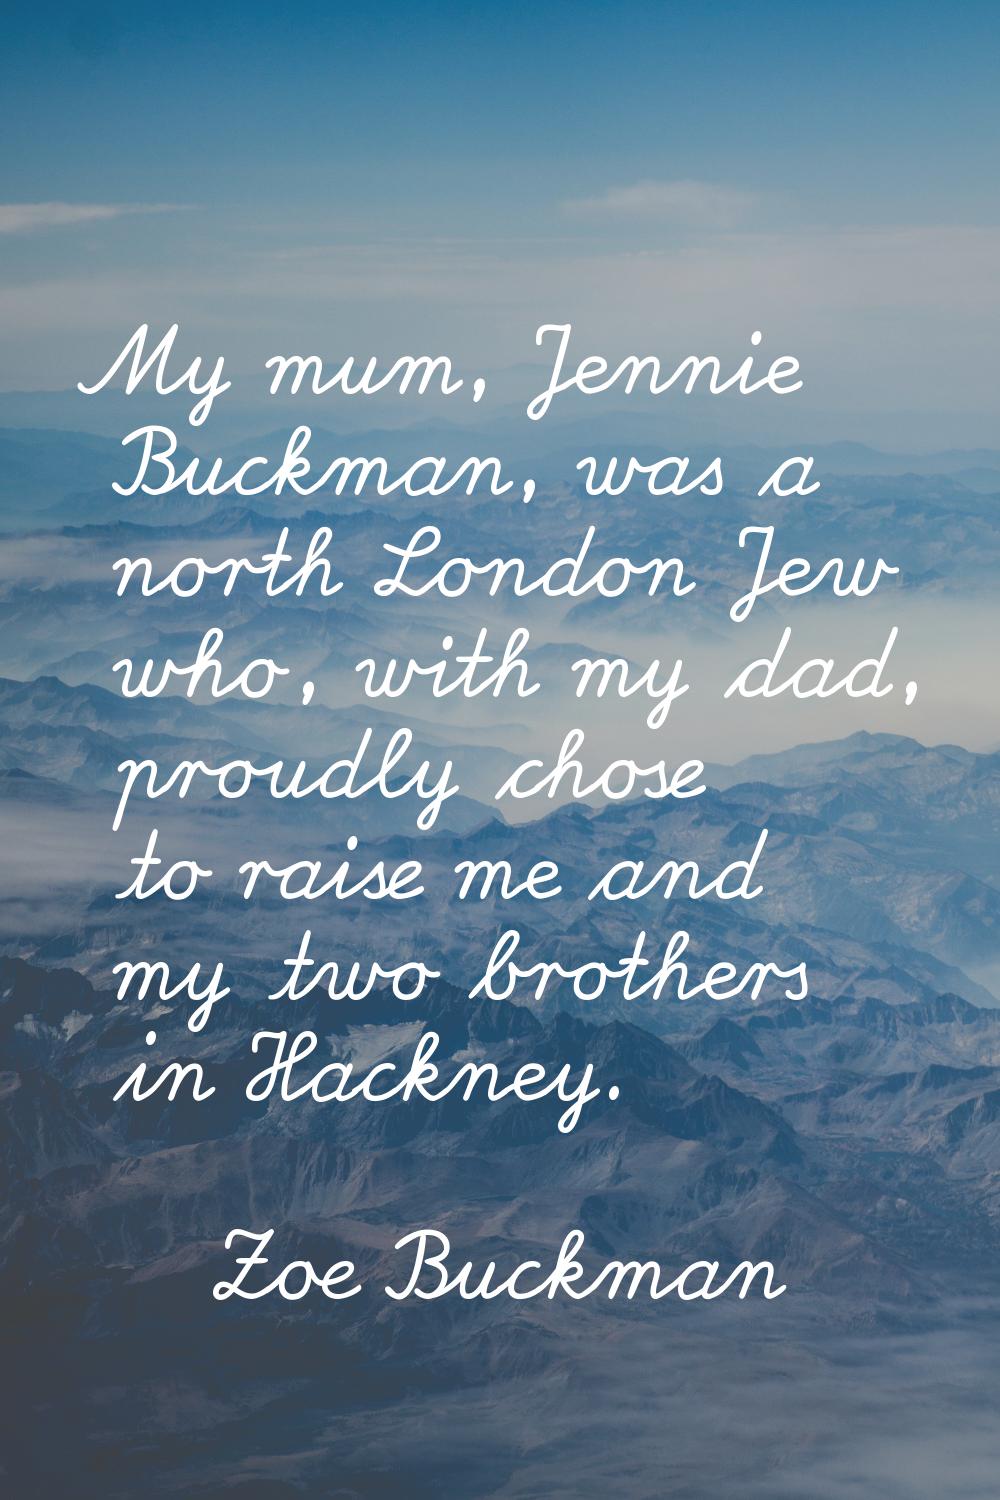 My mum, Jennie Buckman, was a north London Jew who, with my dad, proudly chose to raise me and my t